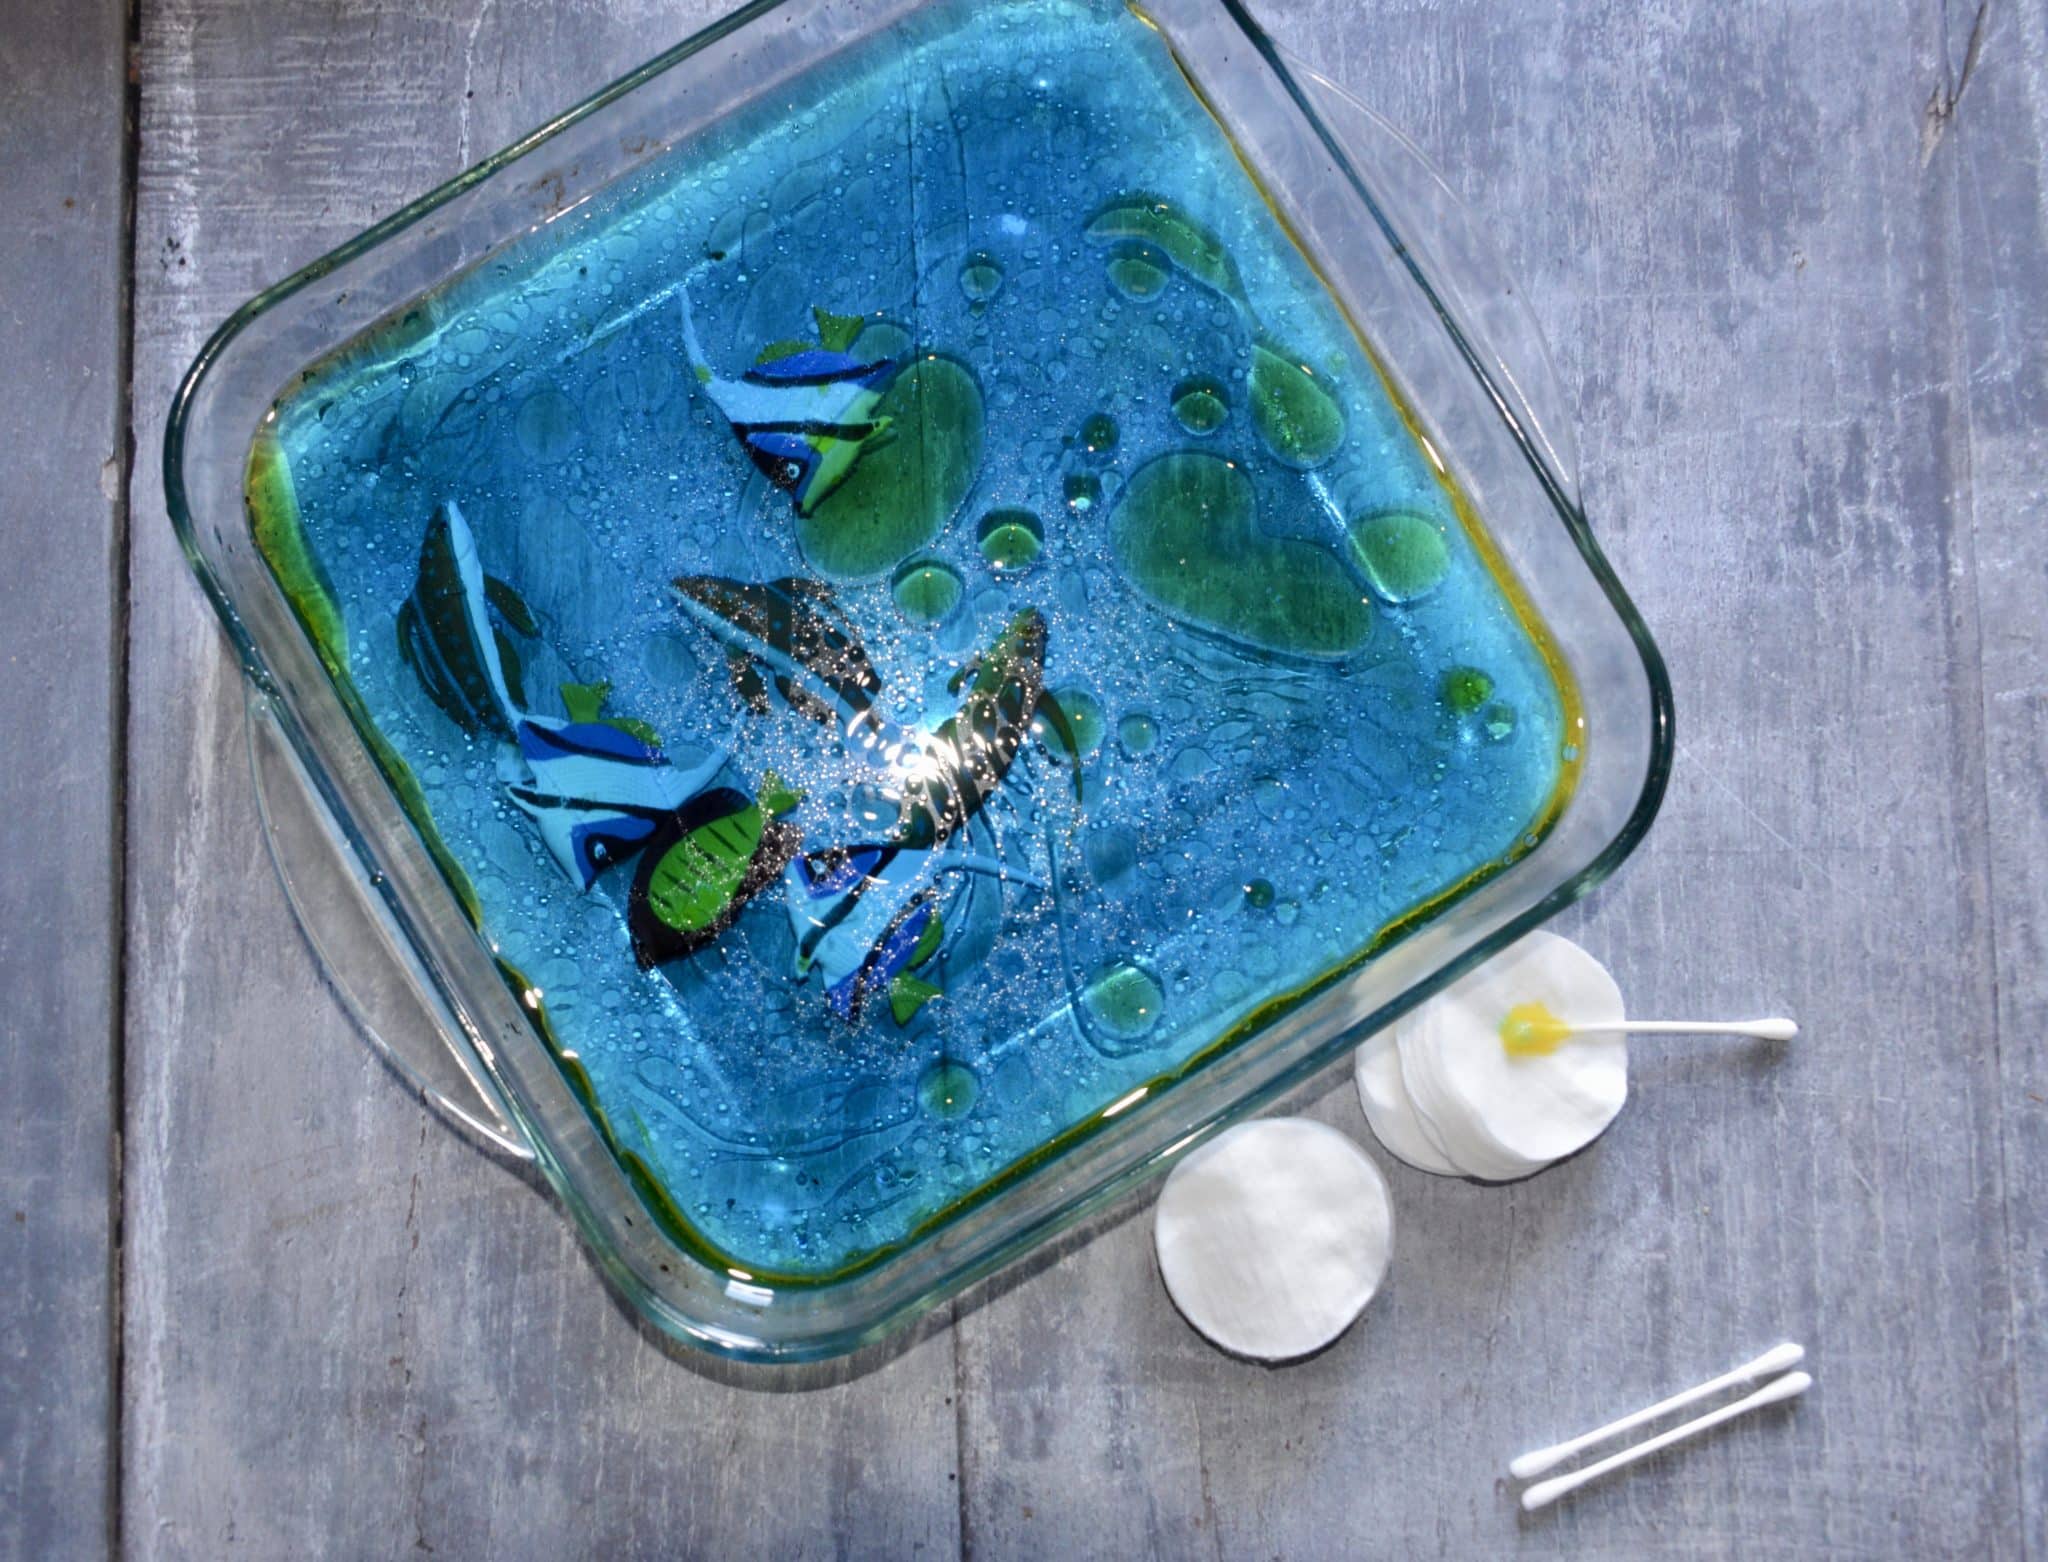 oil spill activity. Image shows a glass tray filled with blue water and a layer of vegetable oil floating on the top.